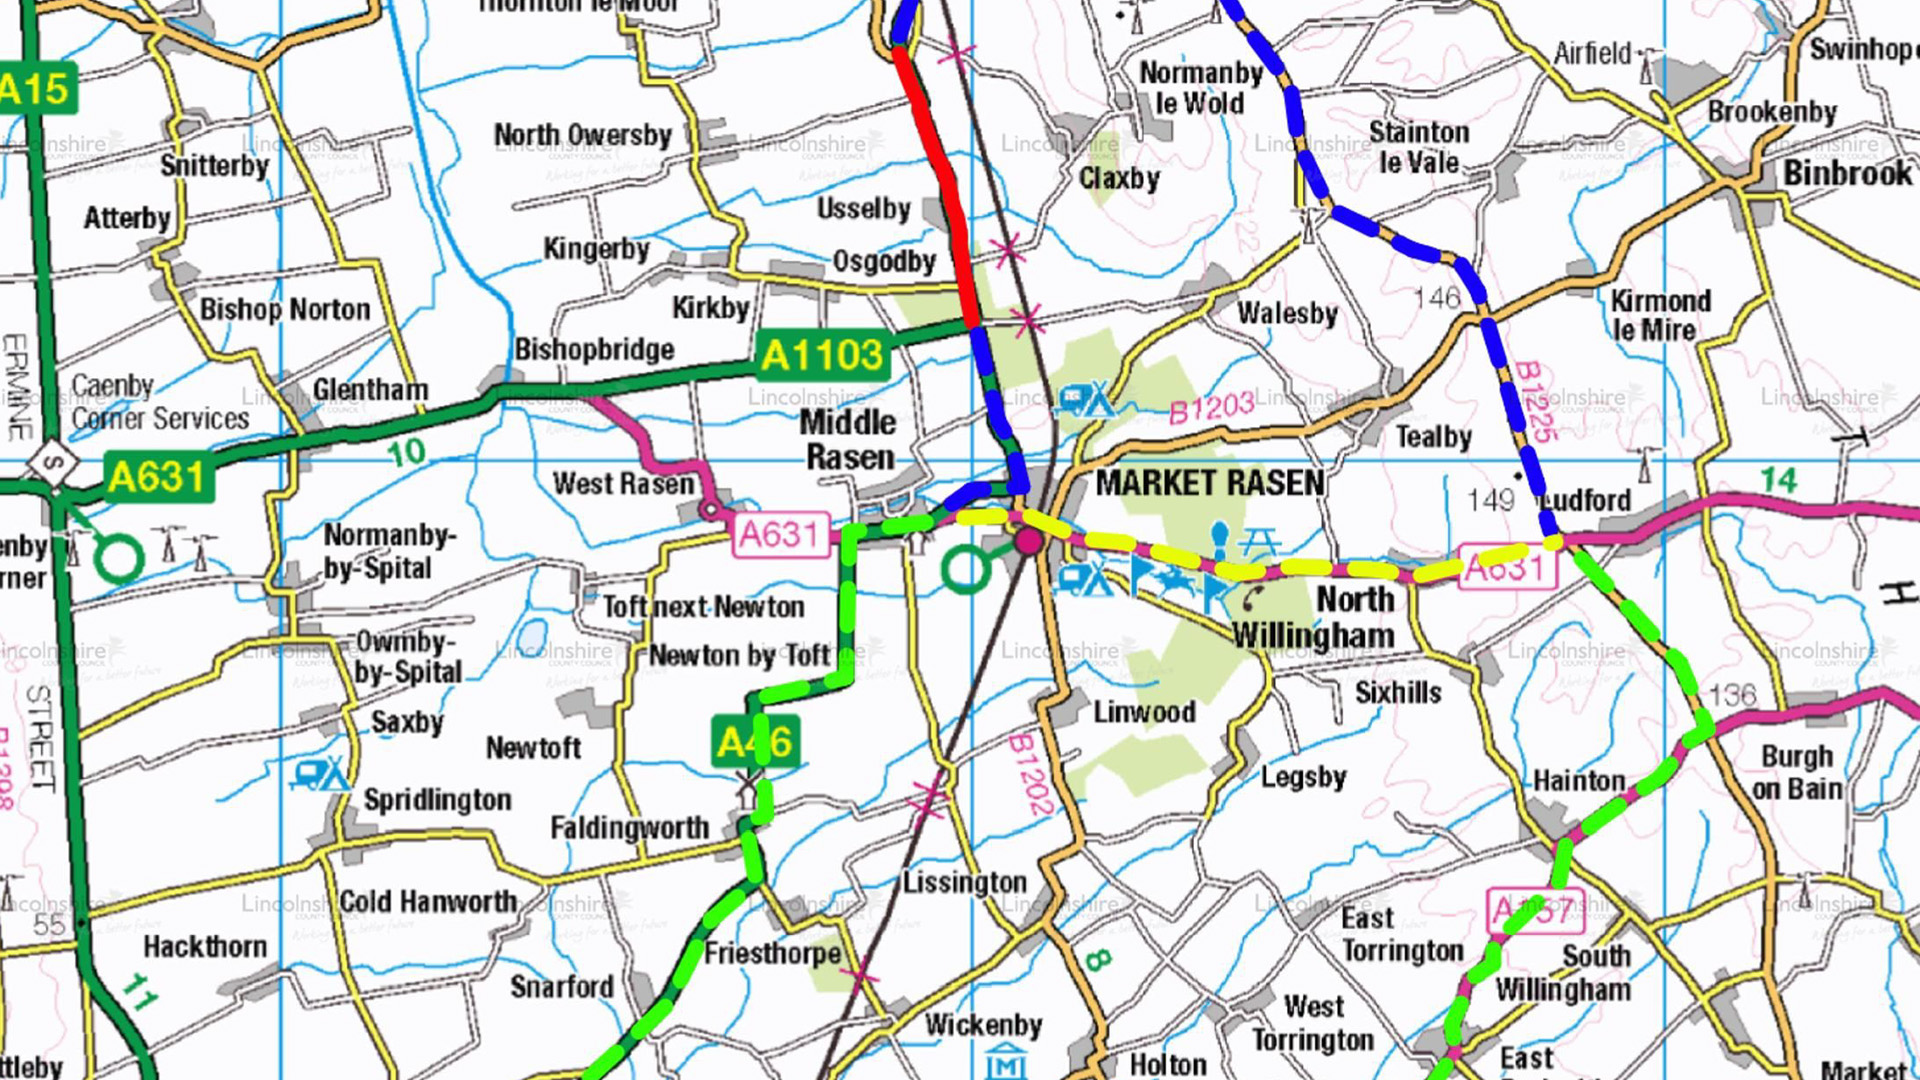 Diversion route a46 usselby